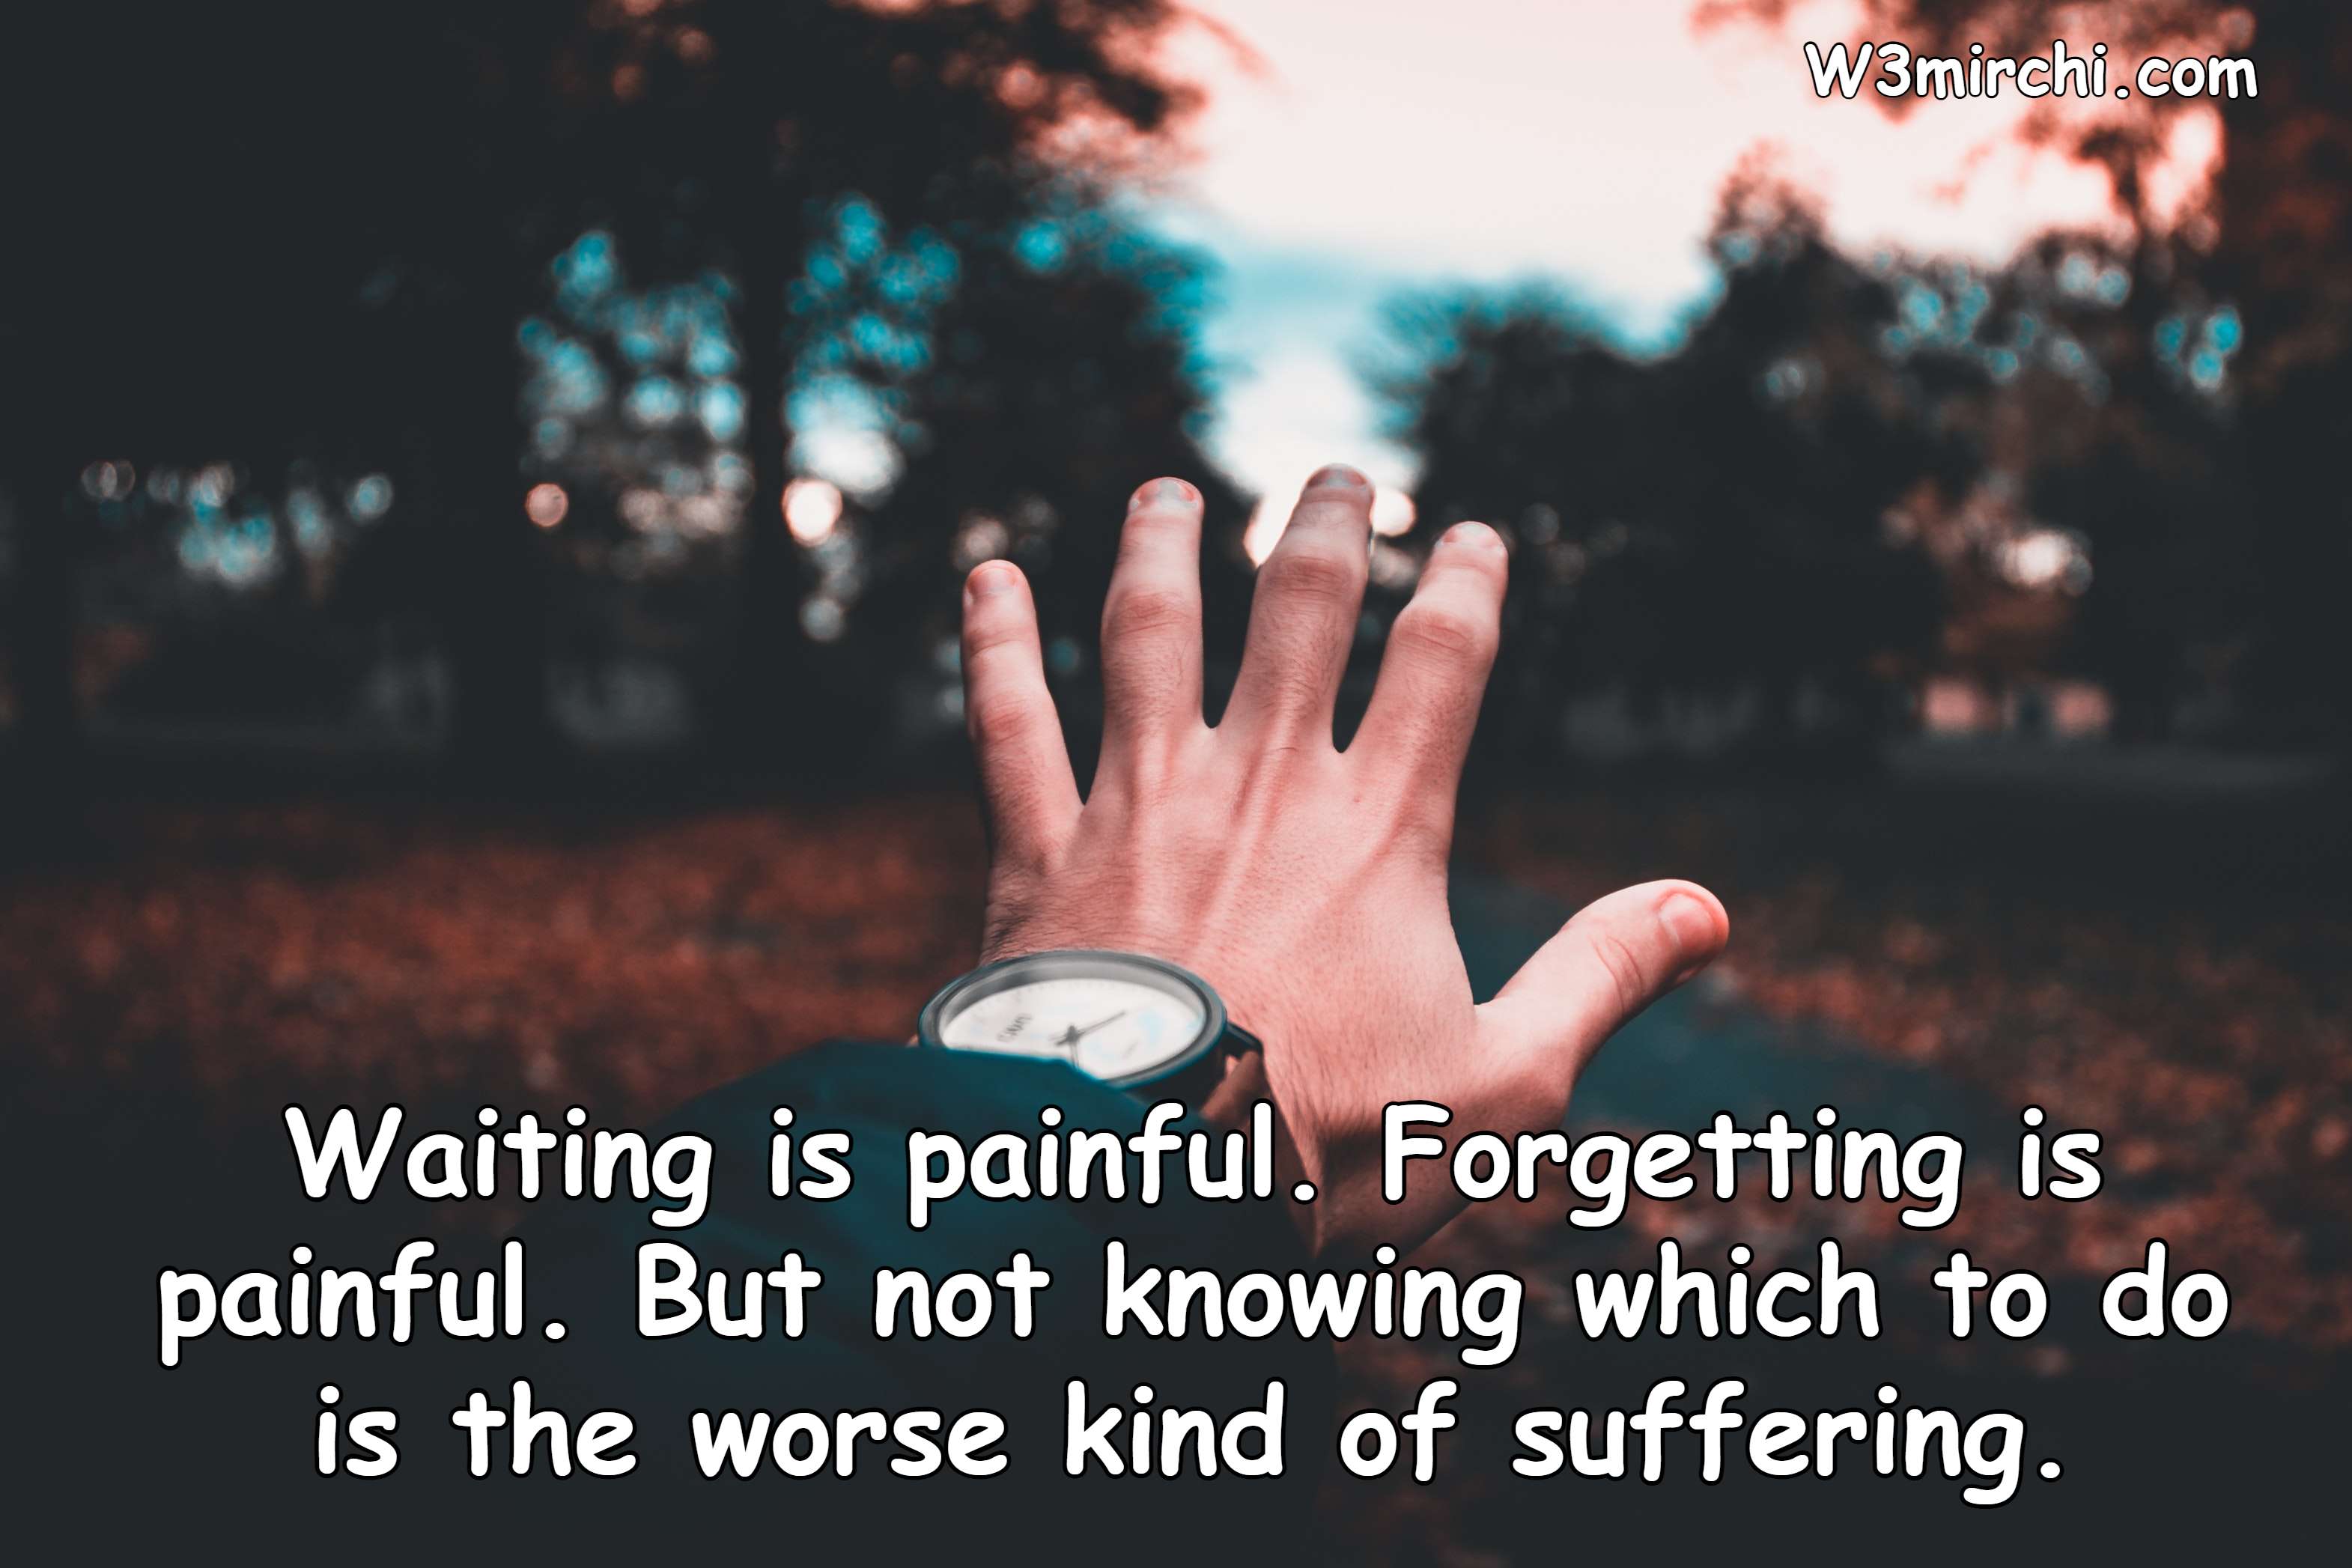 Waiting is painful. Forgetting is painful.